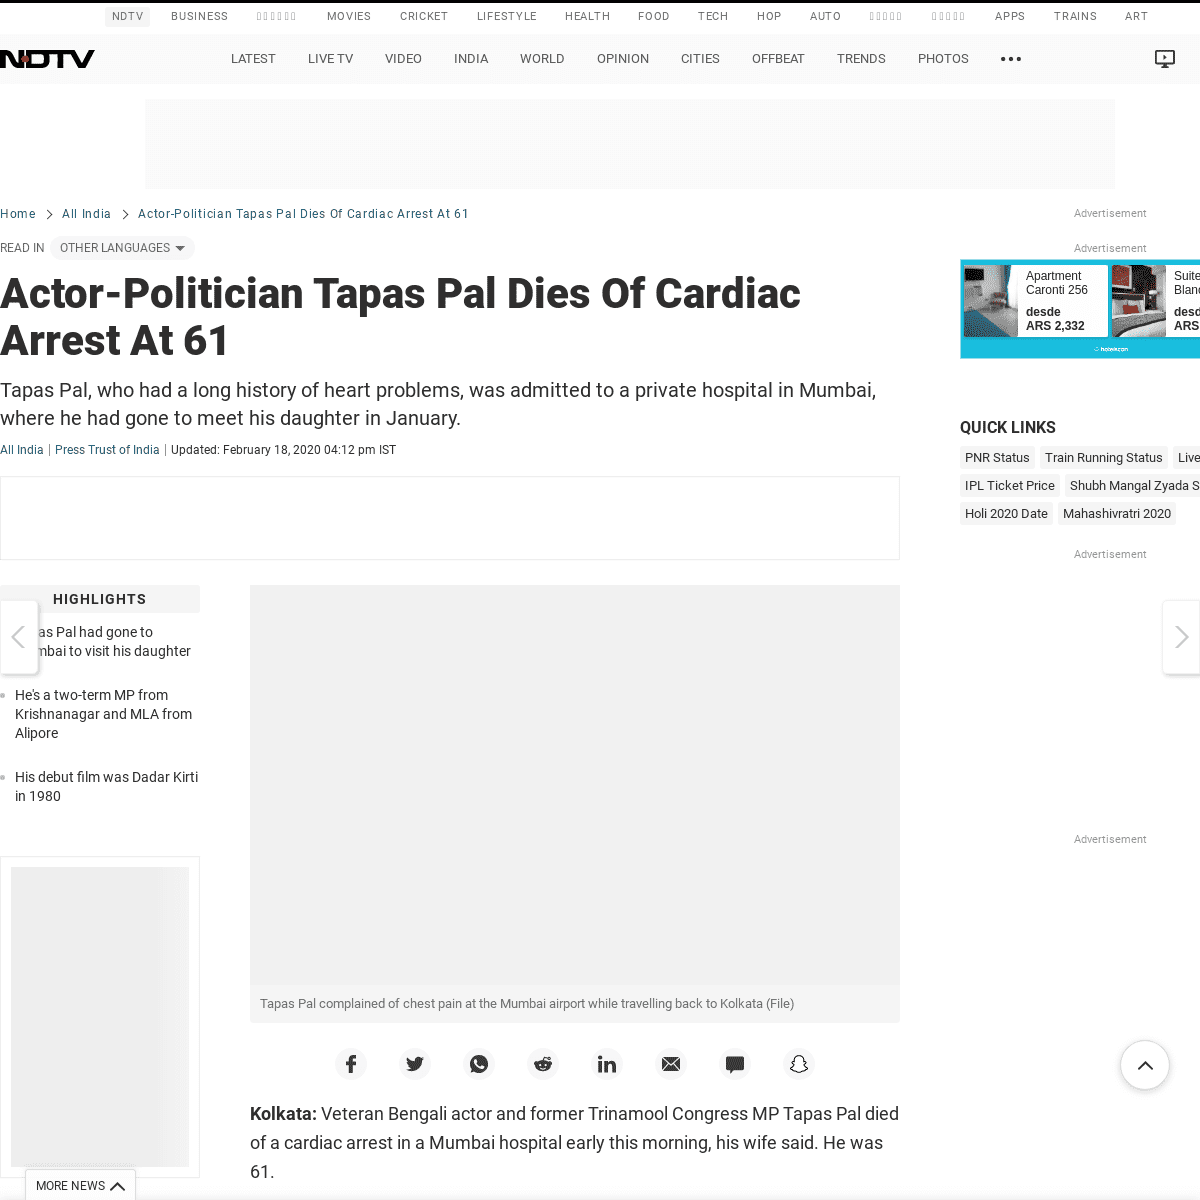 A complete backup of www.ndtv.com/india-news/actor-politician-tapas-pal-dies-of-cardiac-arrest-at-61-2181694